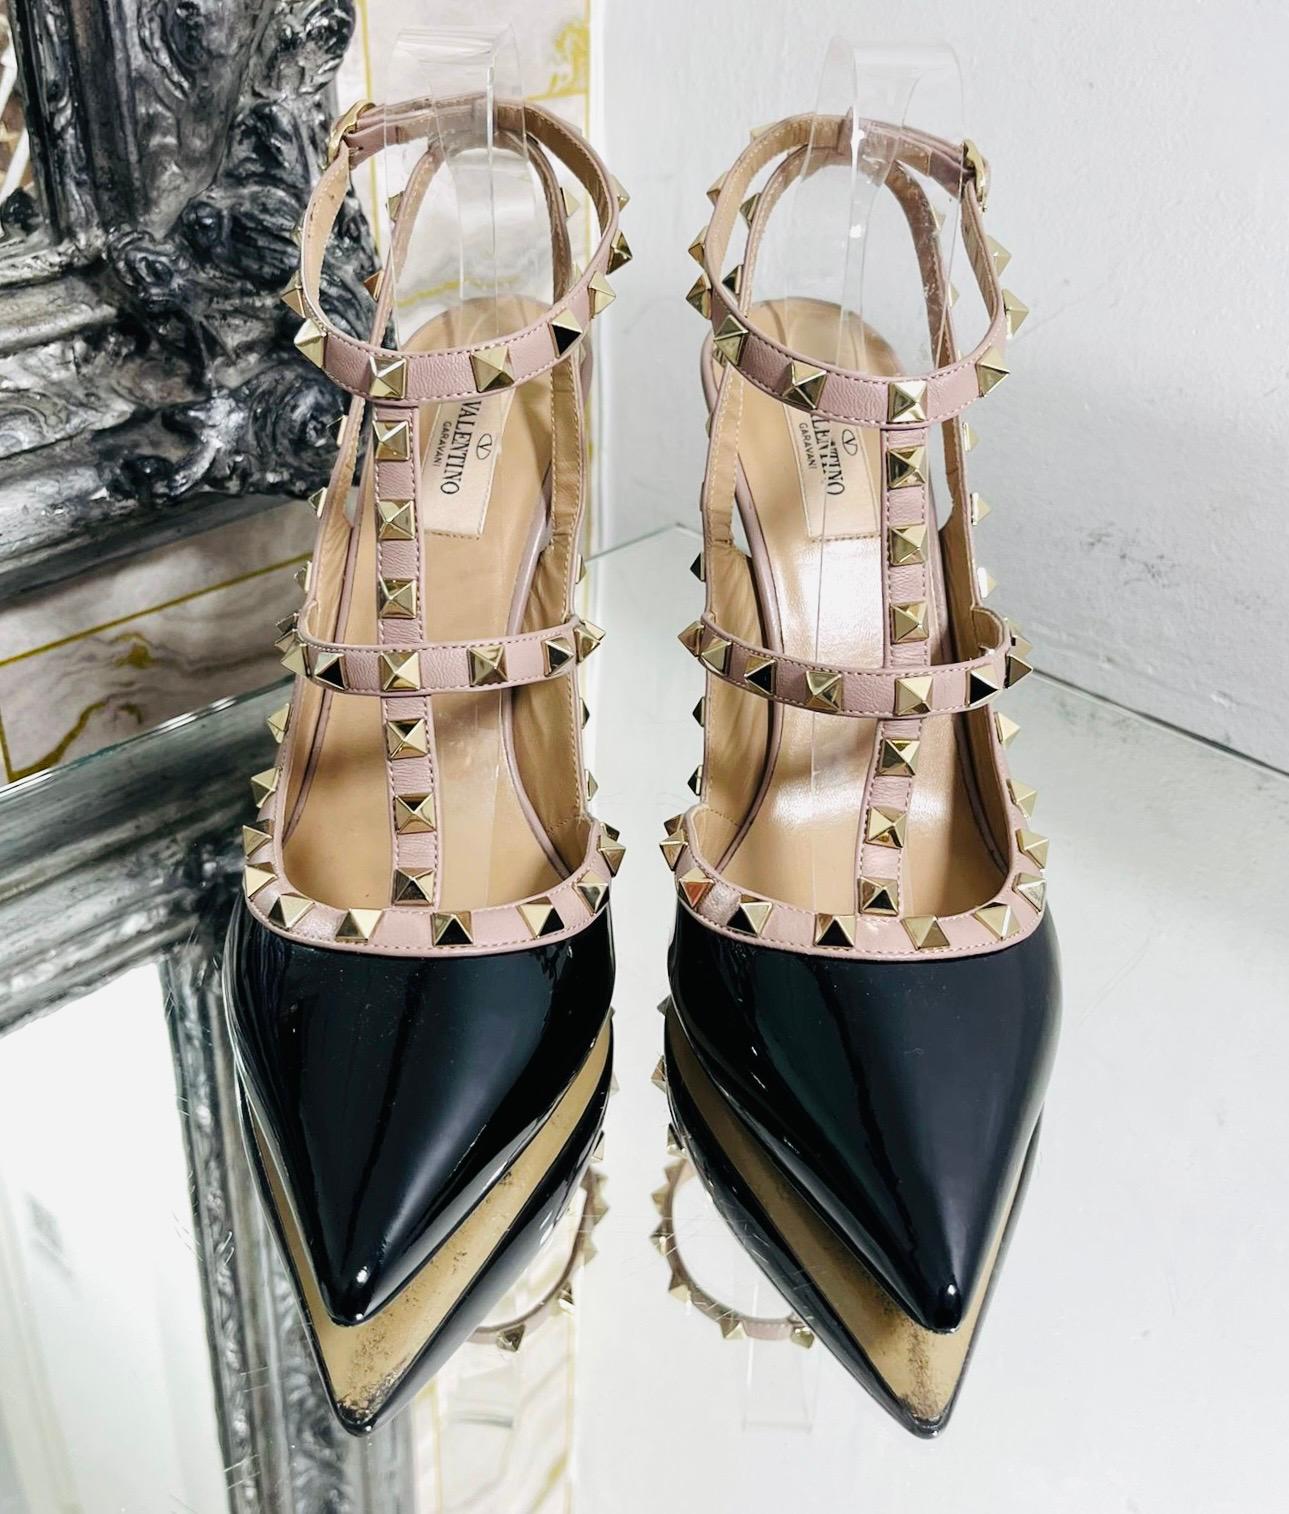 Valentino Rockstud Patent Leather Heels

Black, slingback heels designed with nude straps detailed with the brand's signature gold Rockstuds.

Featuring pointed toe, stiletto heel and adjustable buckle closure. Rrp £820

Size – 41.5

Condition –